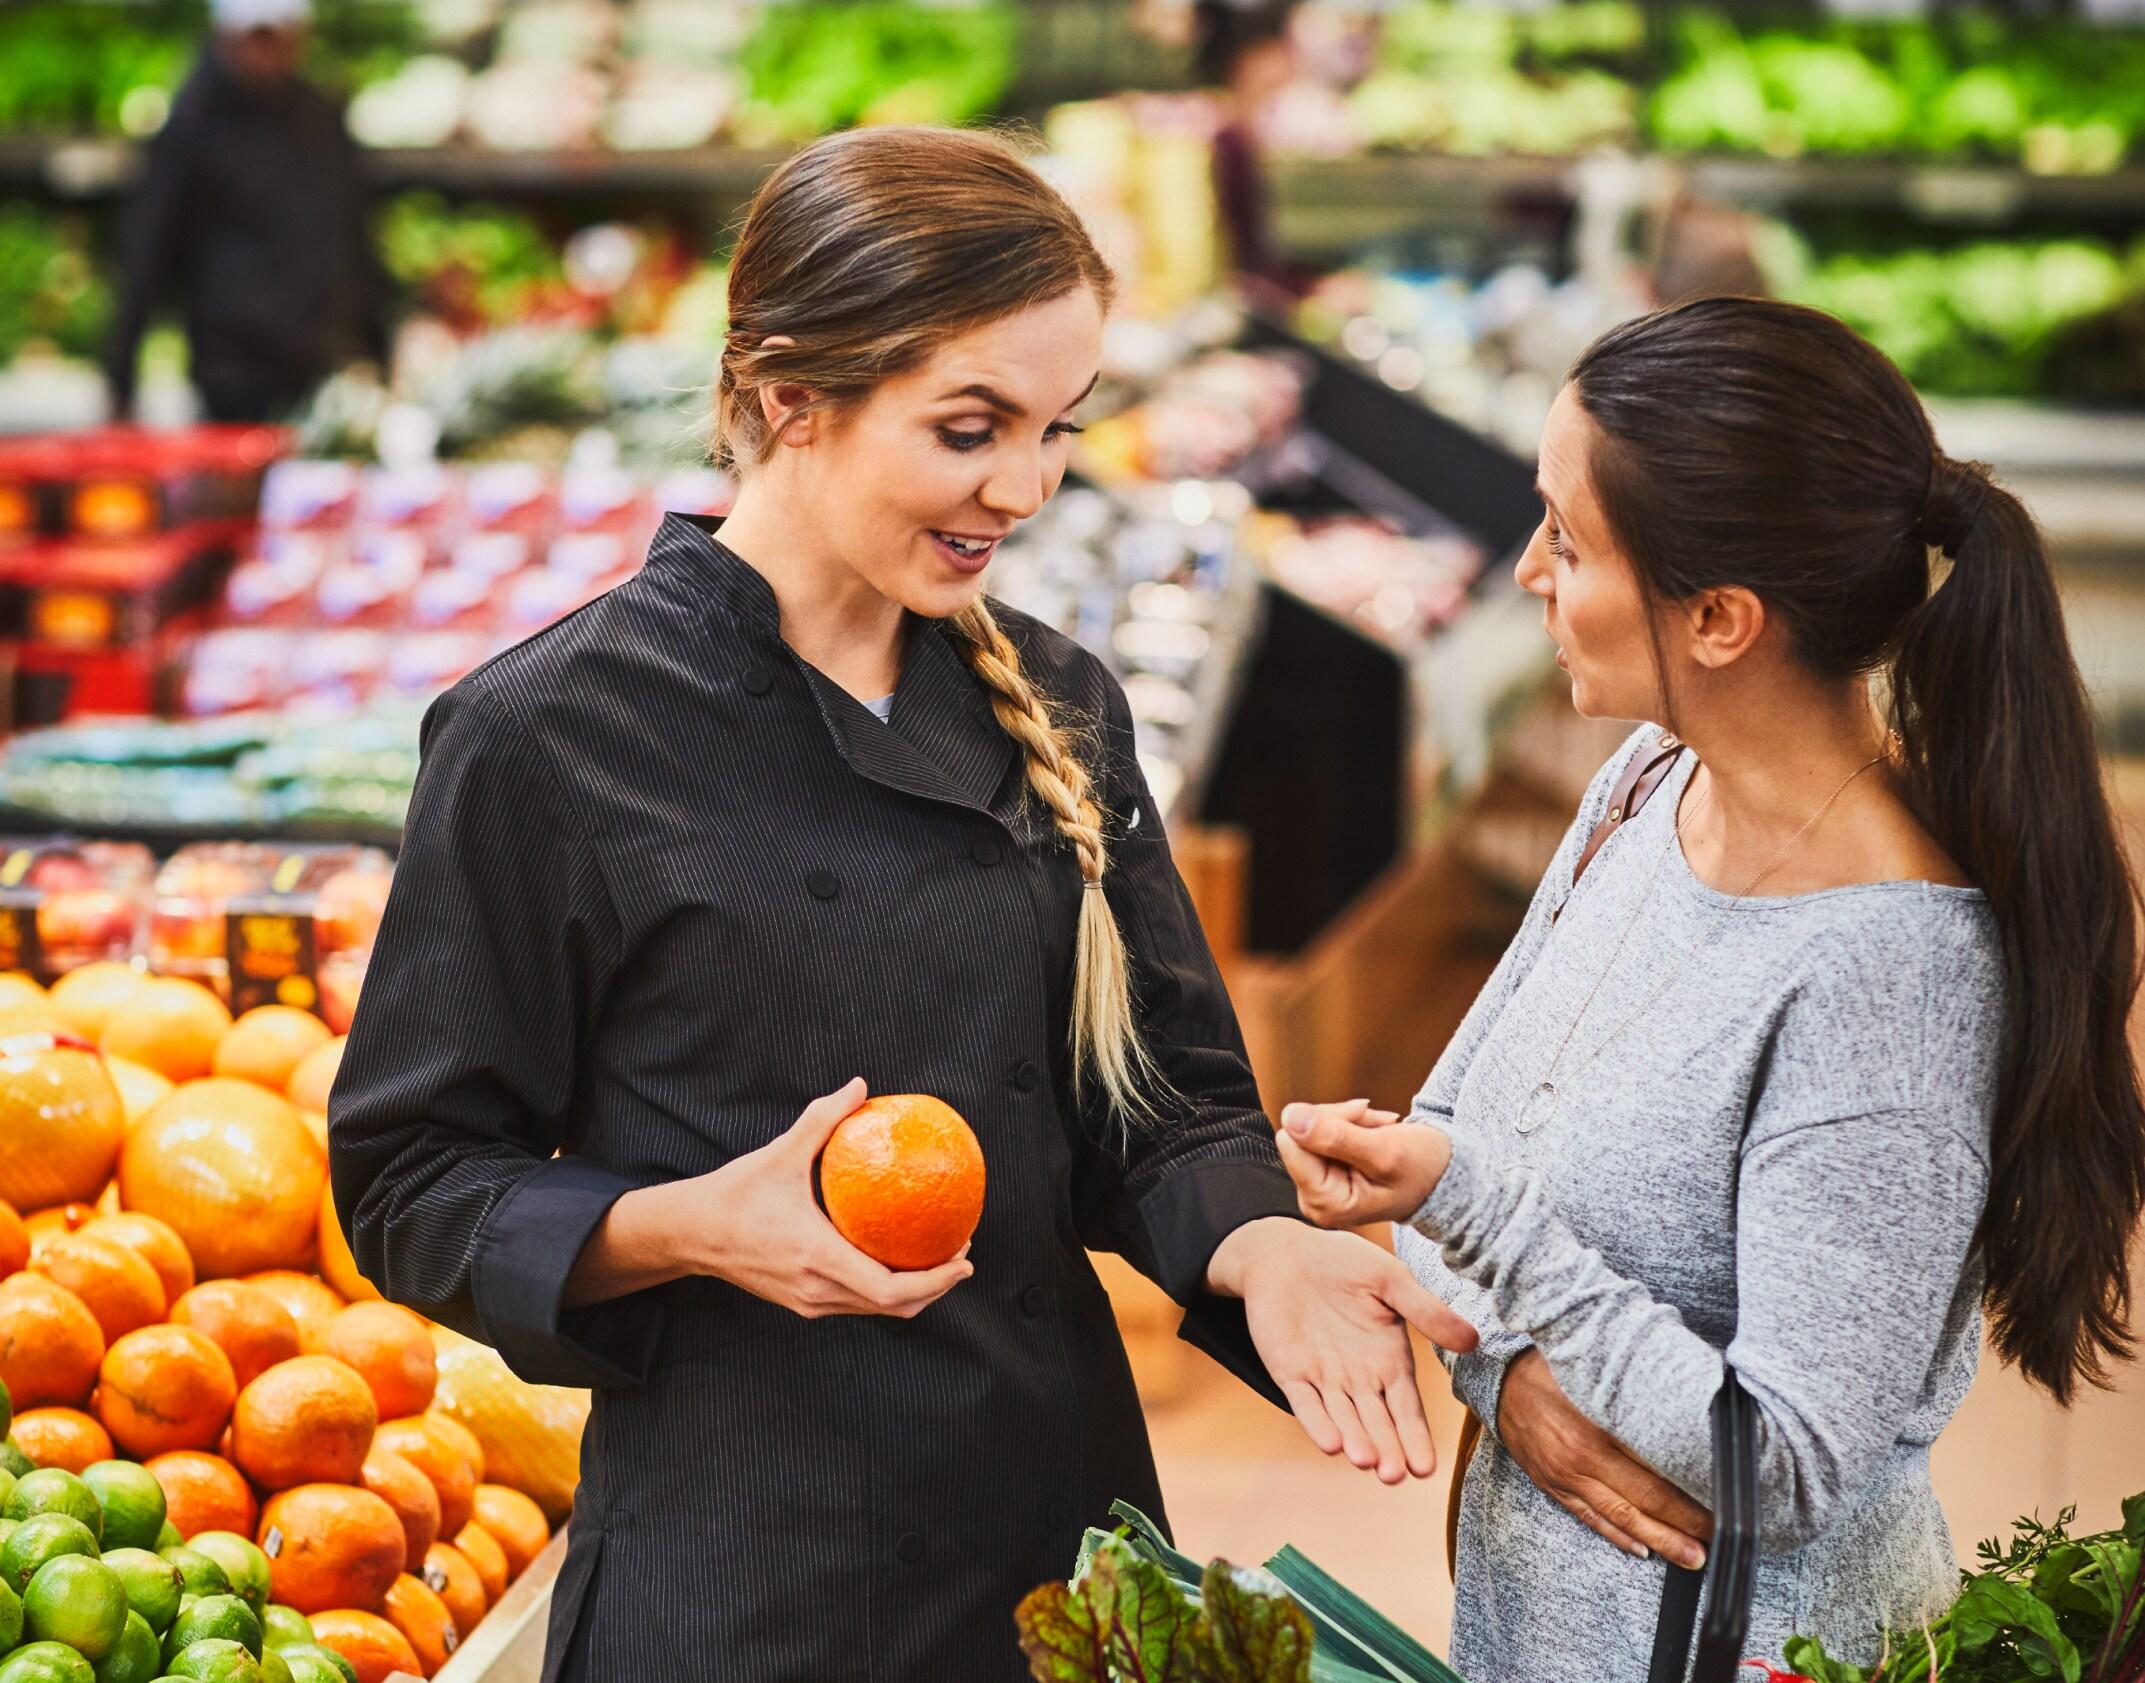 A dietitian speaking with a customer in the fruit aisle of a grocery store.